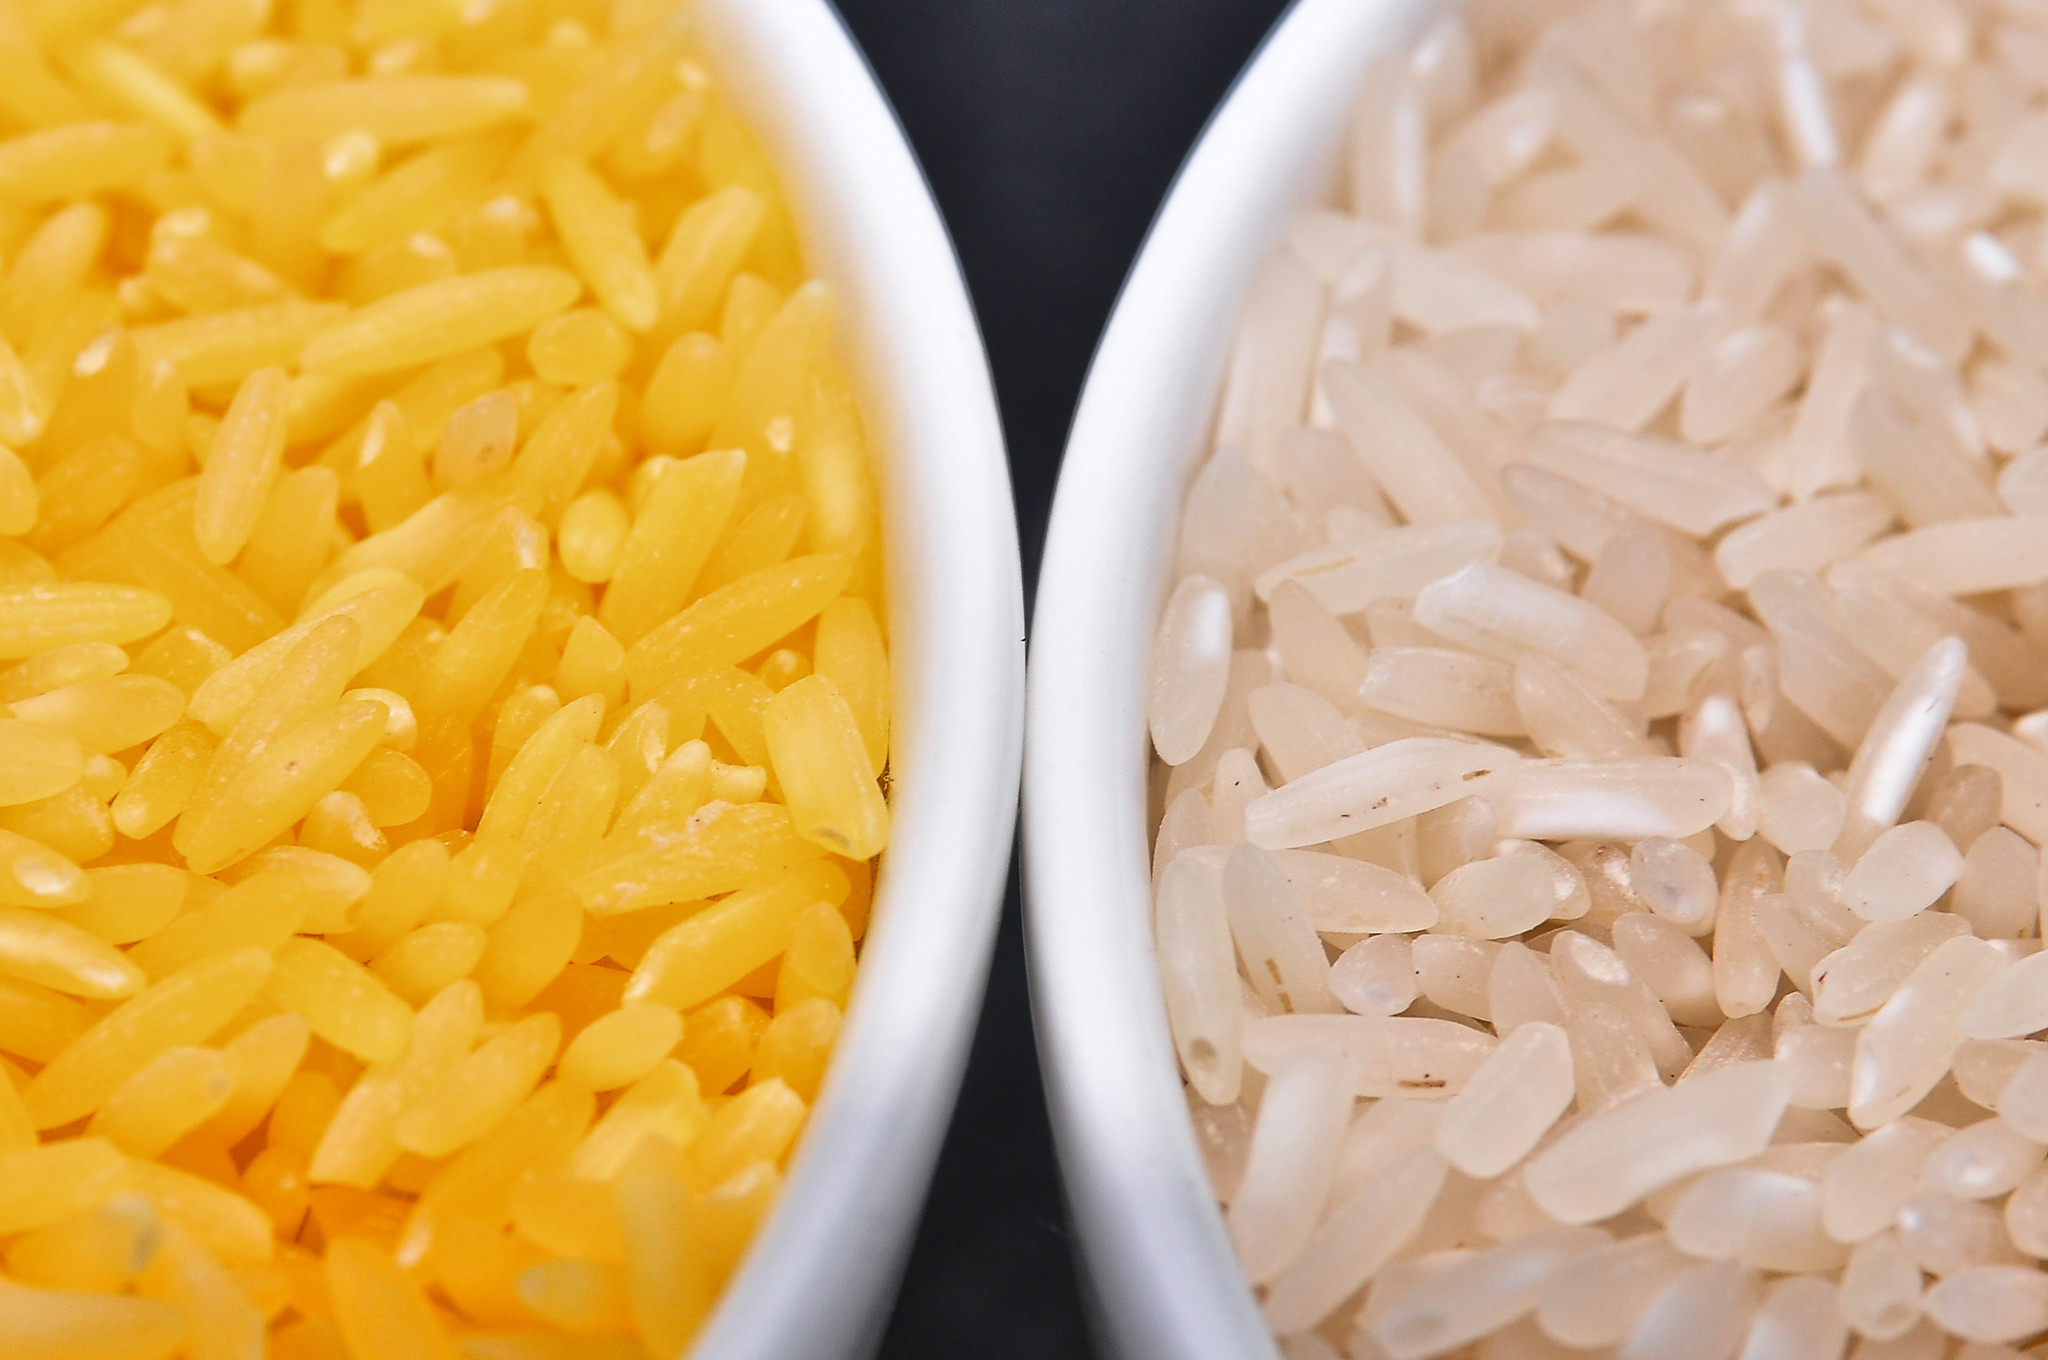 Golden Rice grain (left) compared to white rice grain. Golden Rice is unique because it contains beta carotene, giving it a golden color. (Photo: IRRI)